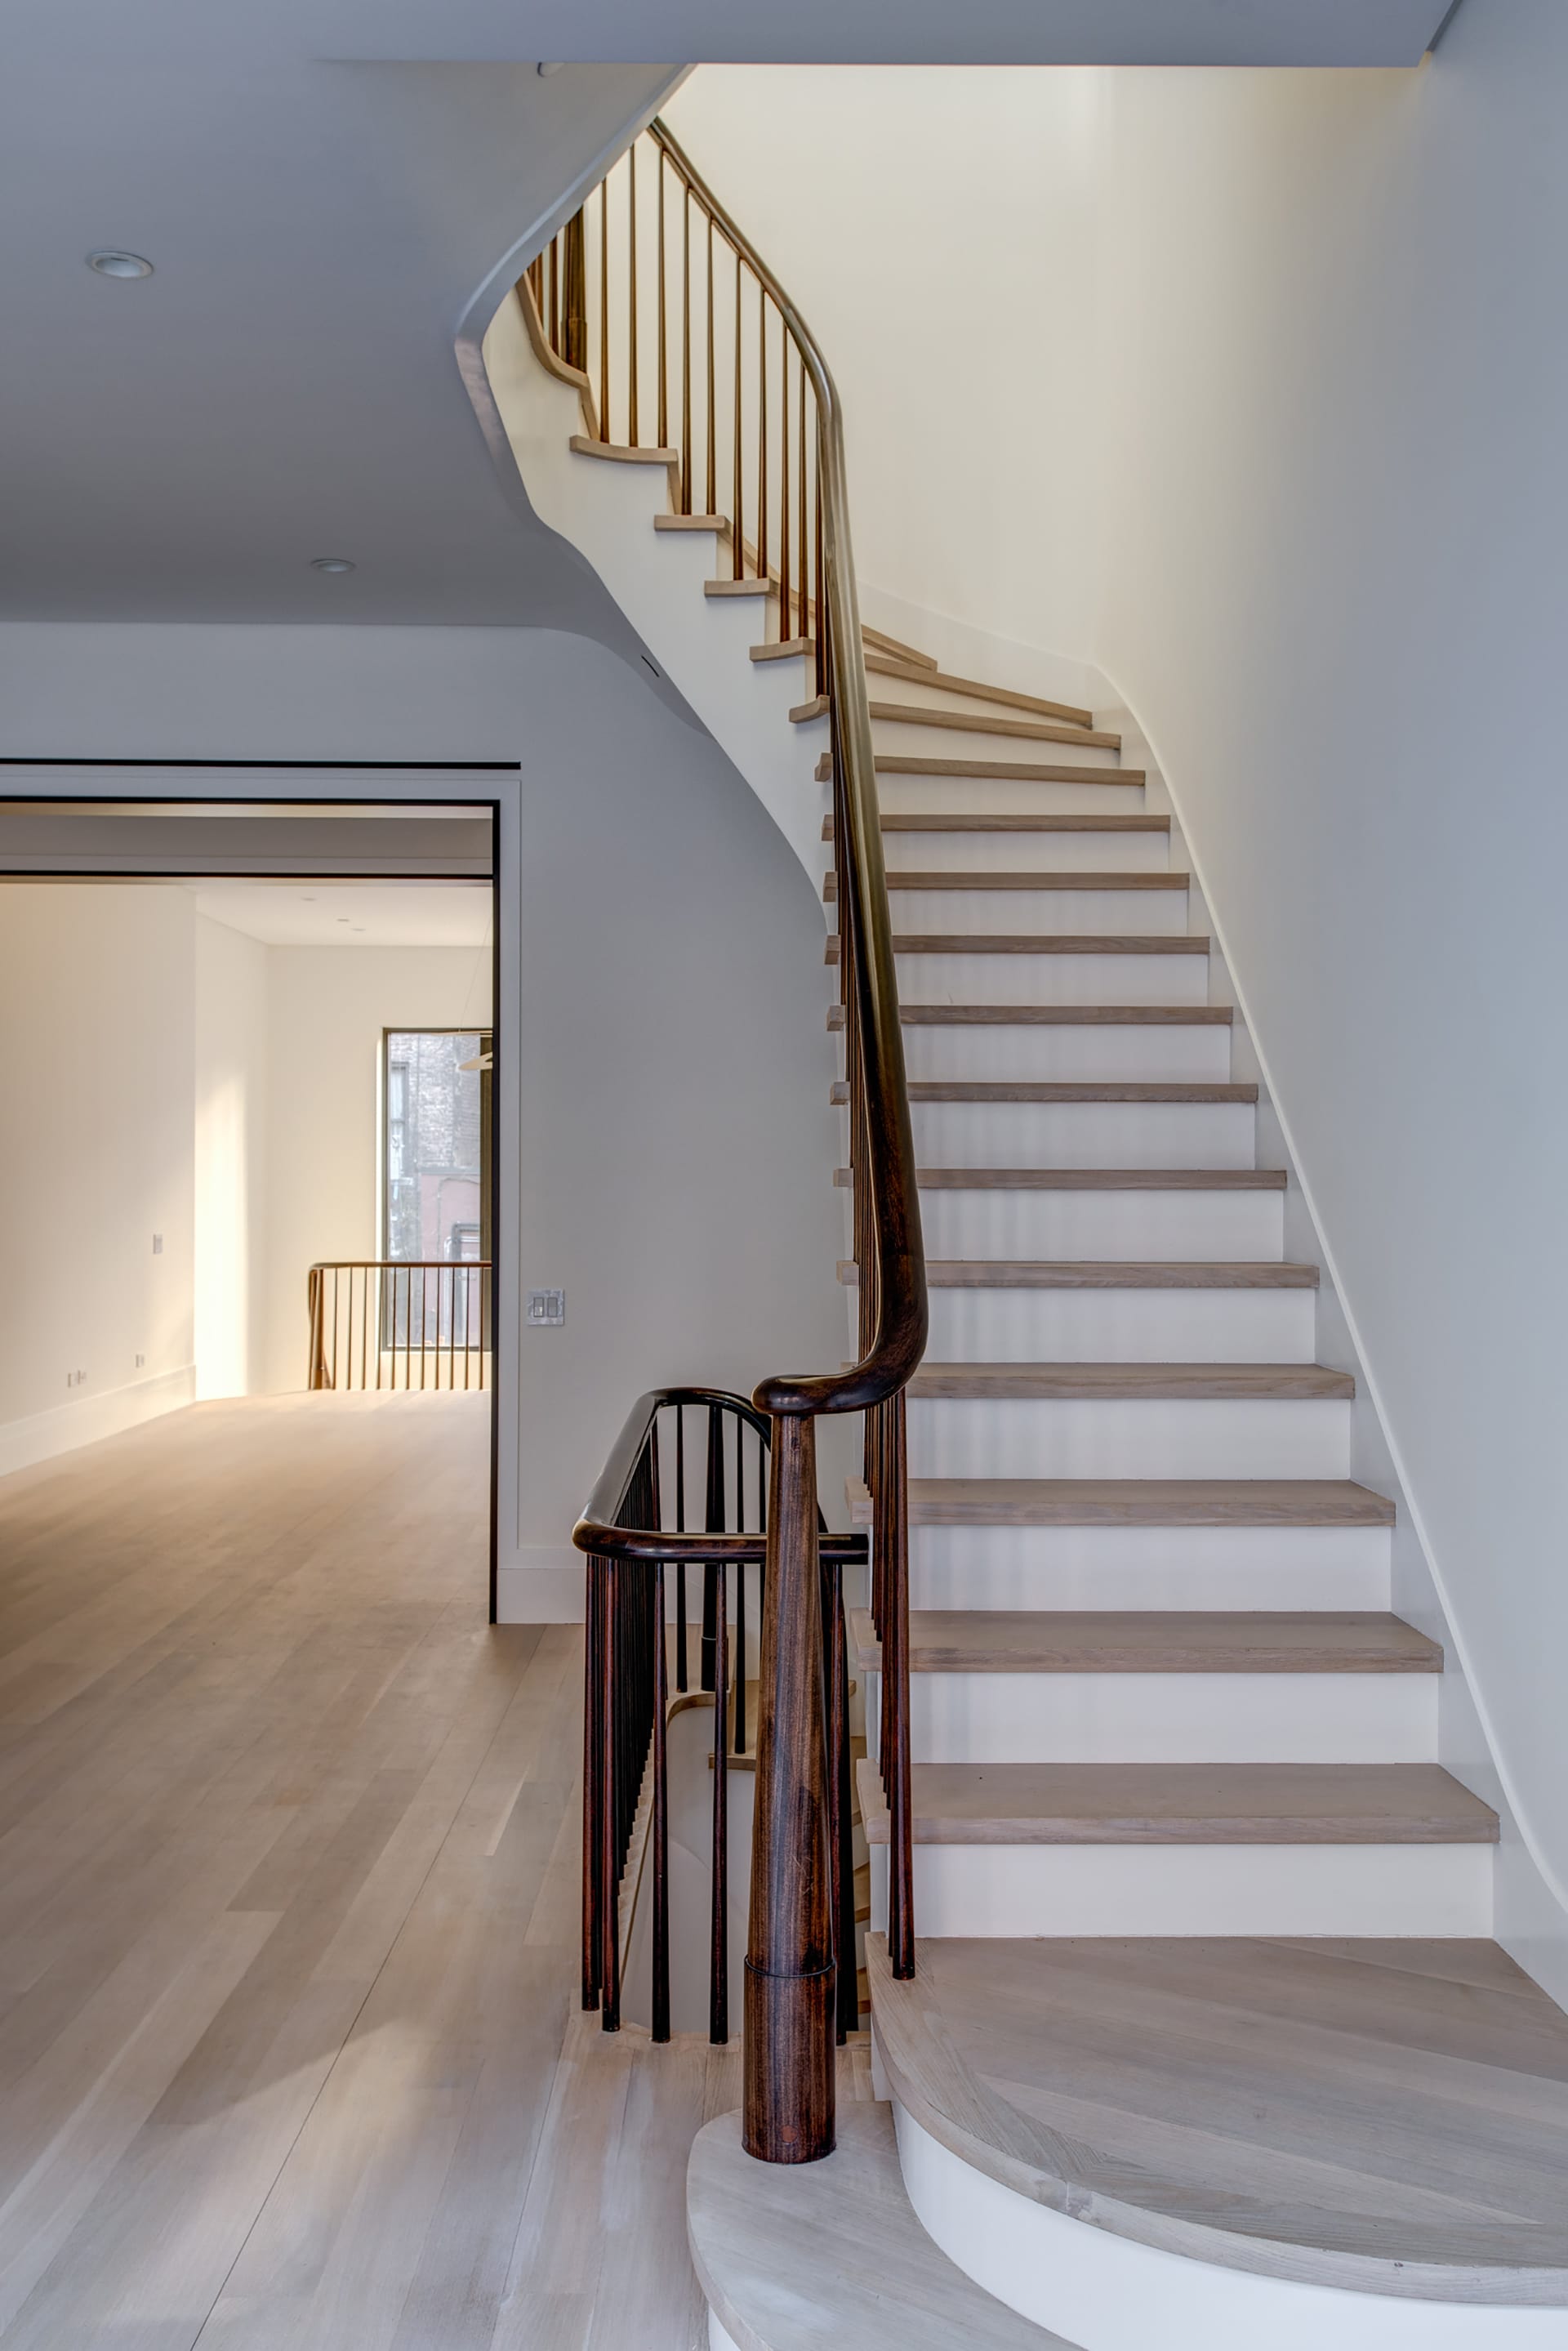 White oak staircase and mahogany handrail and balusters in an Upper West Side Passive House.